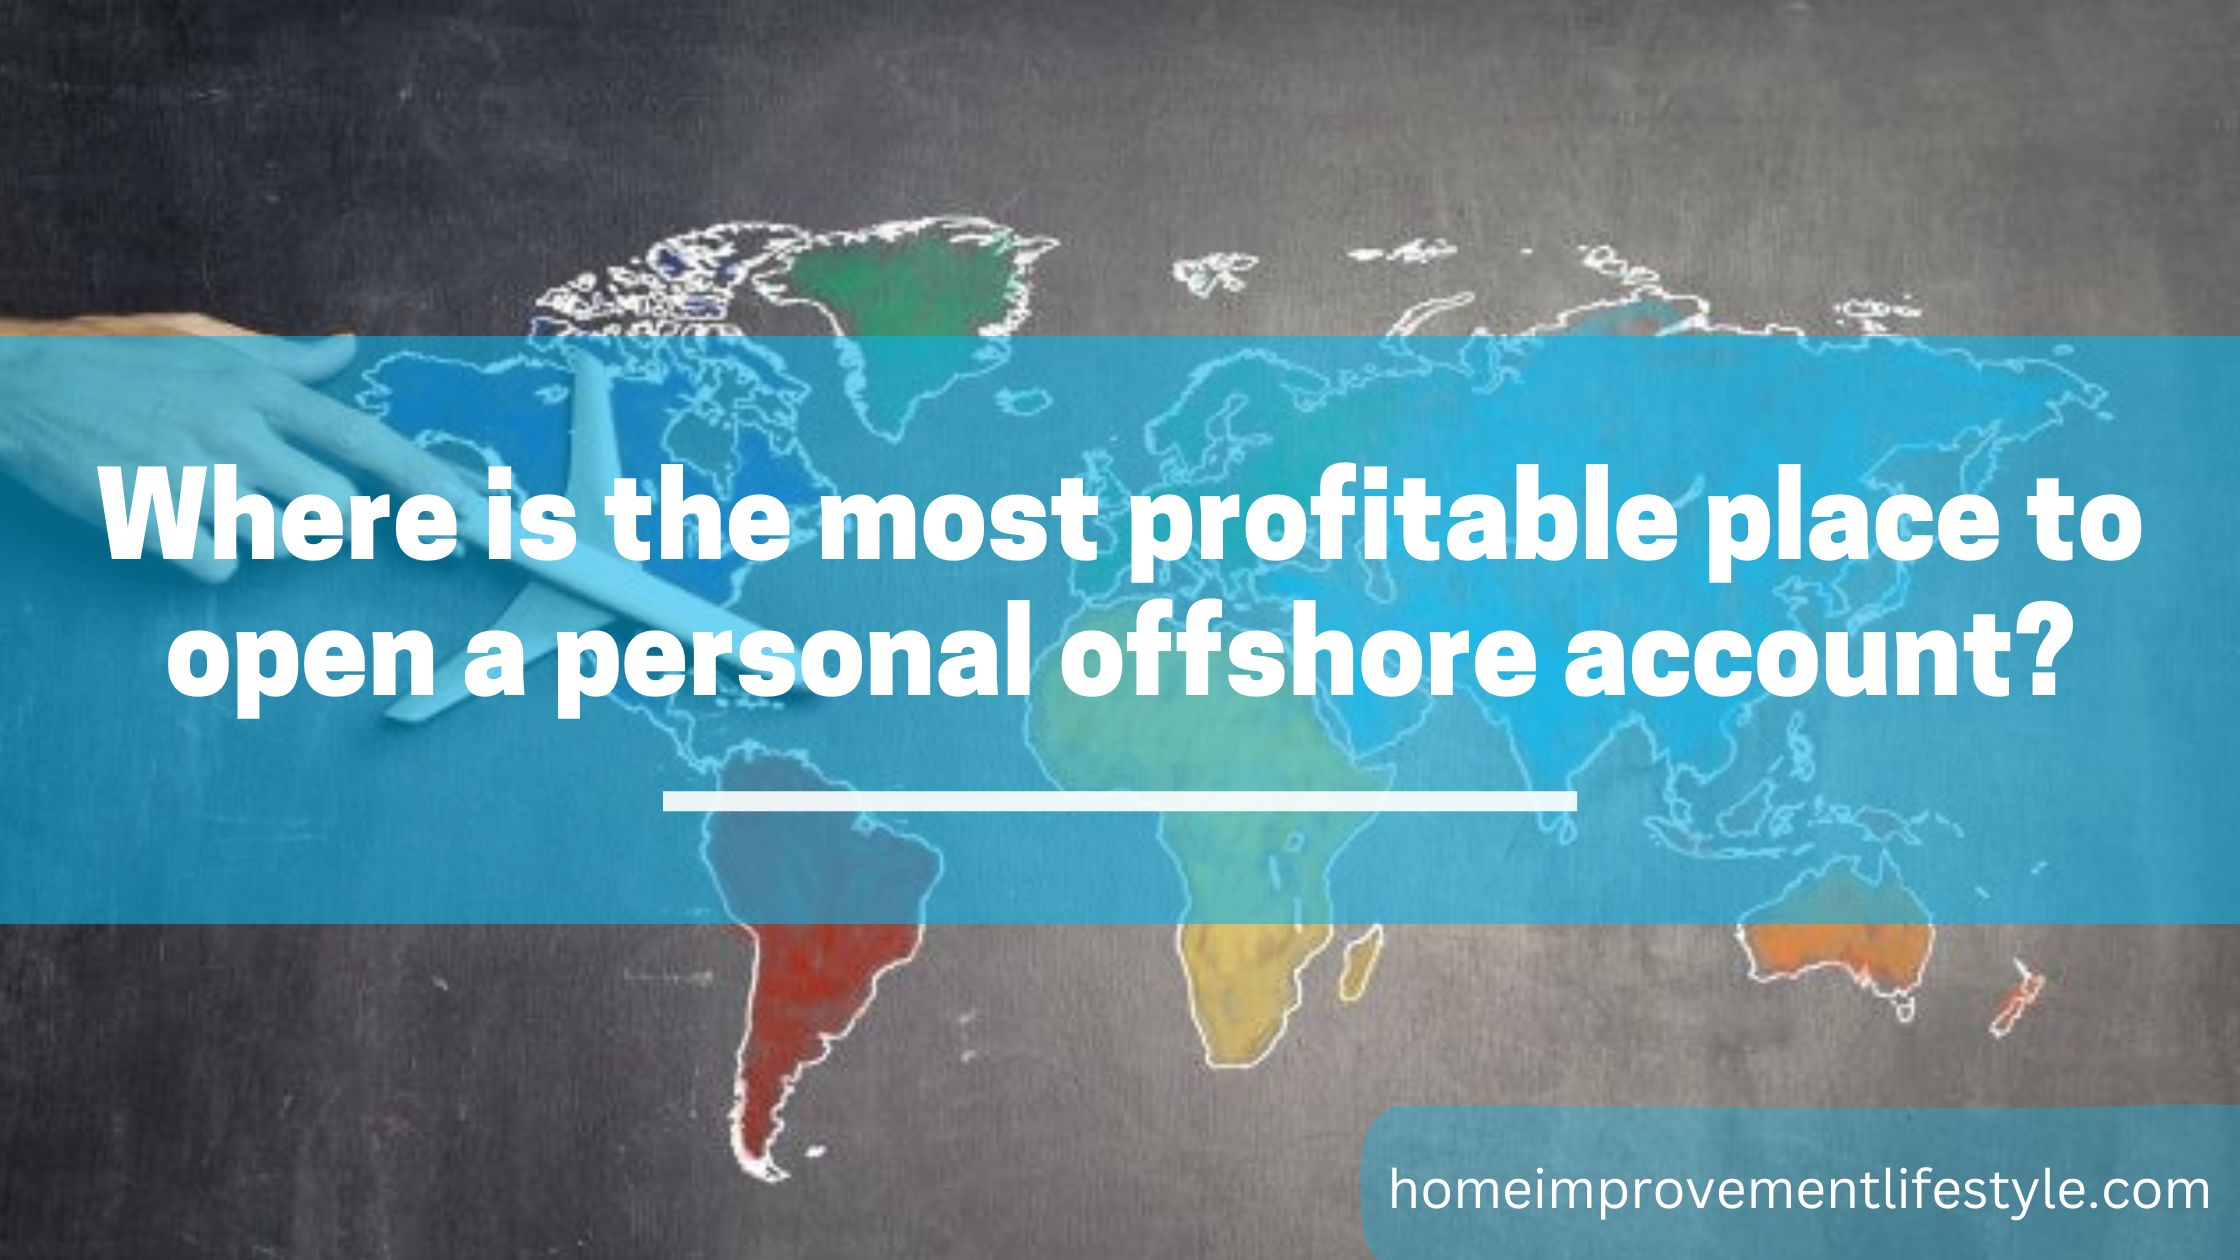 Where is the most profitable place to open a personal offshore account?